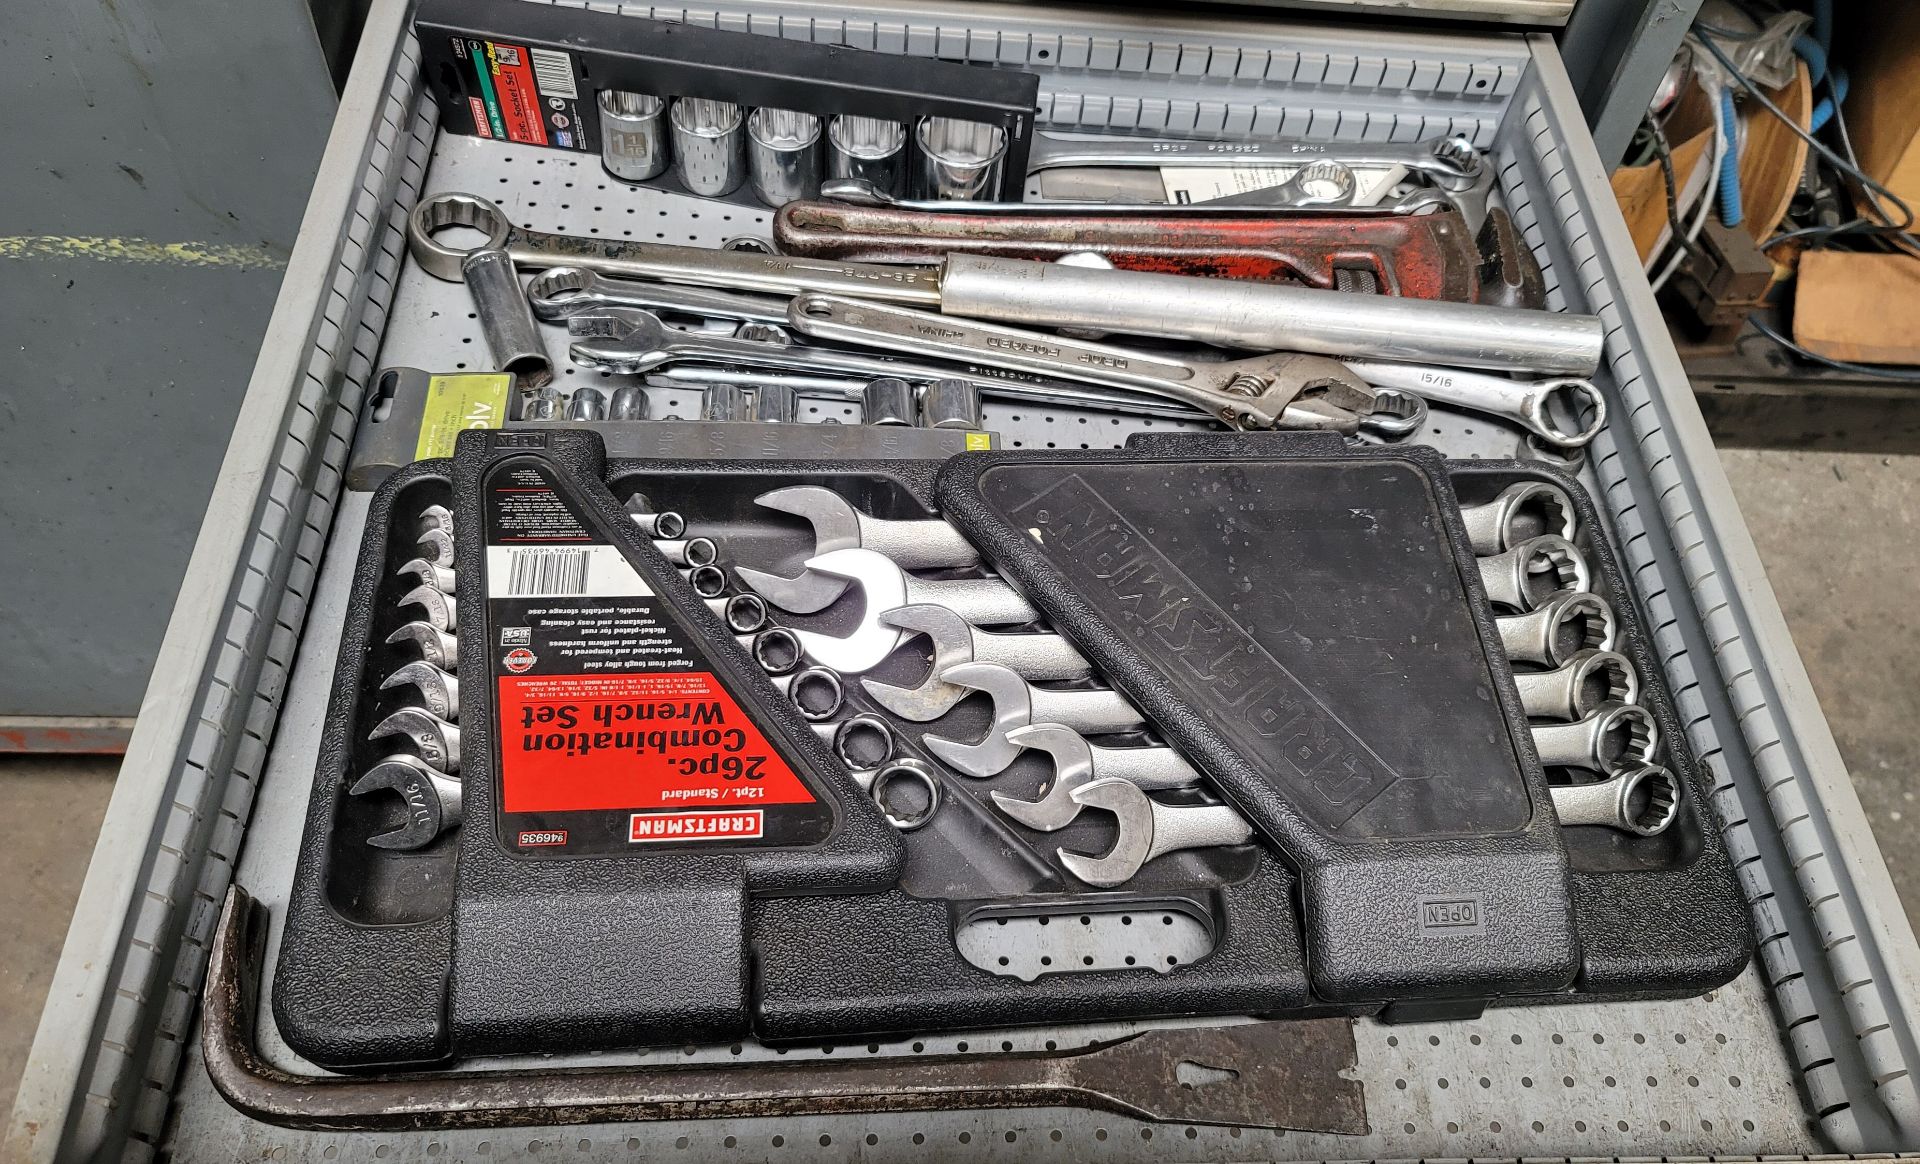 LOT - CONTENTS OF DRAWER: MISC HAND TOOLS